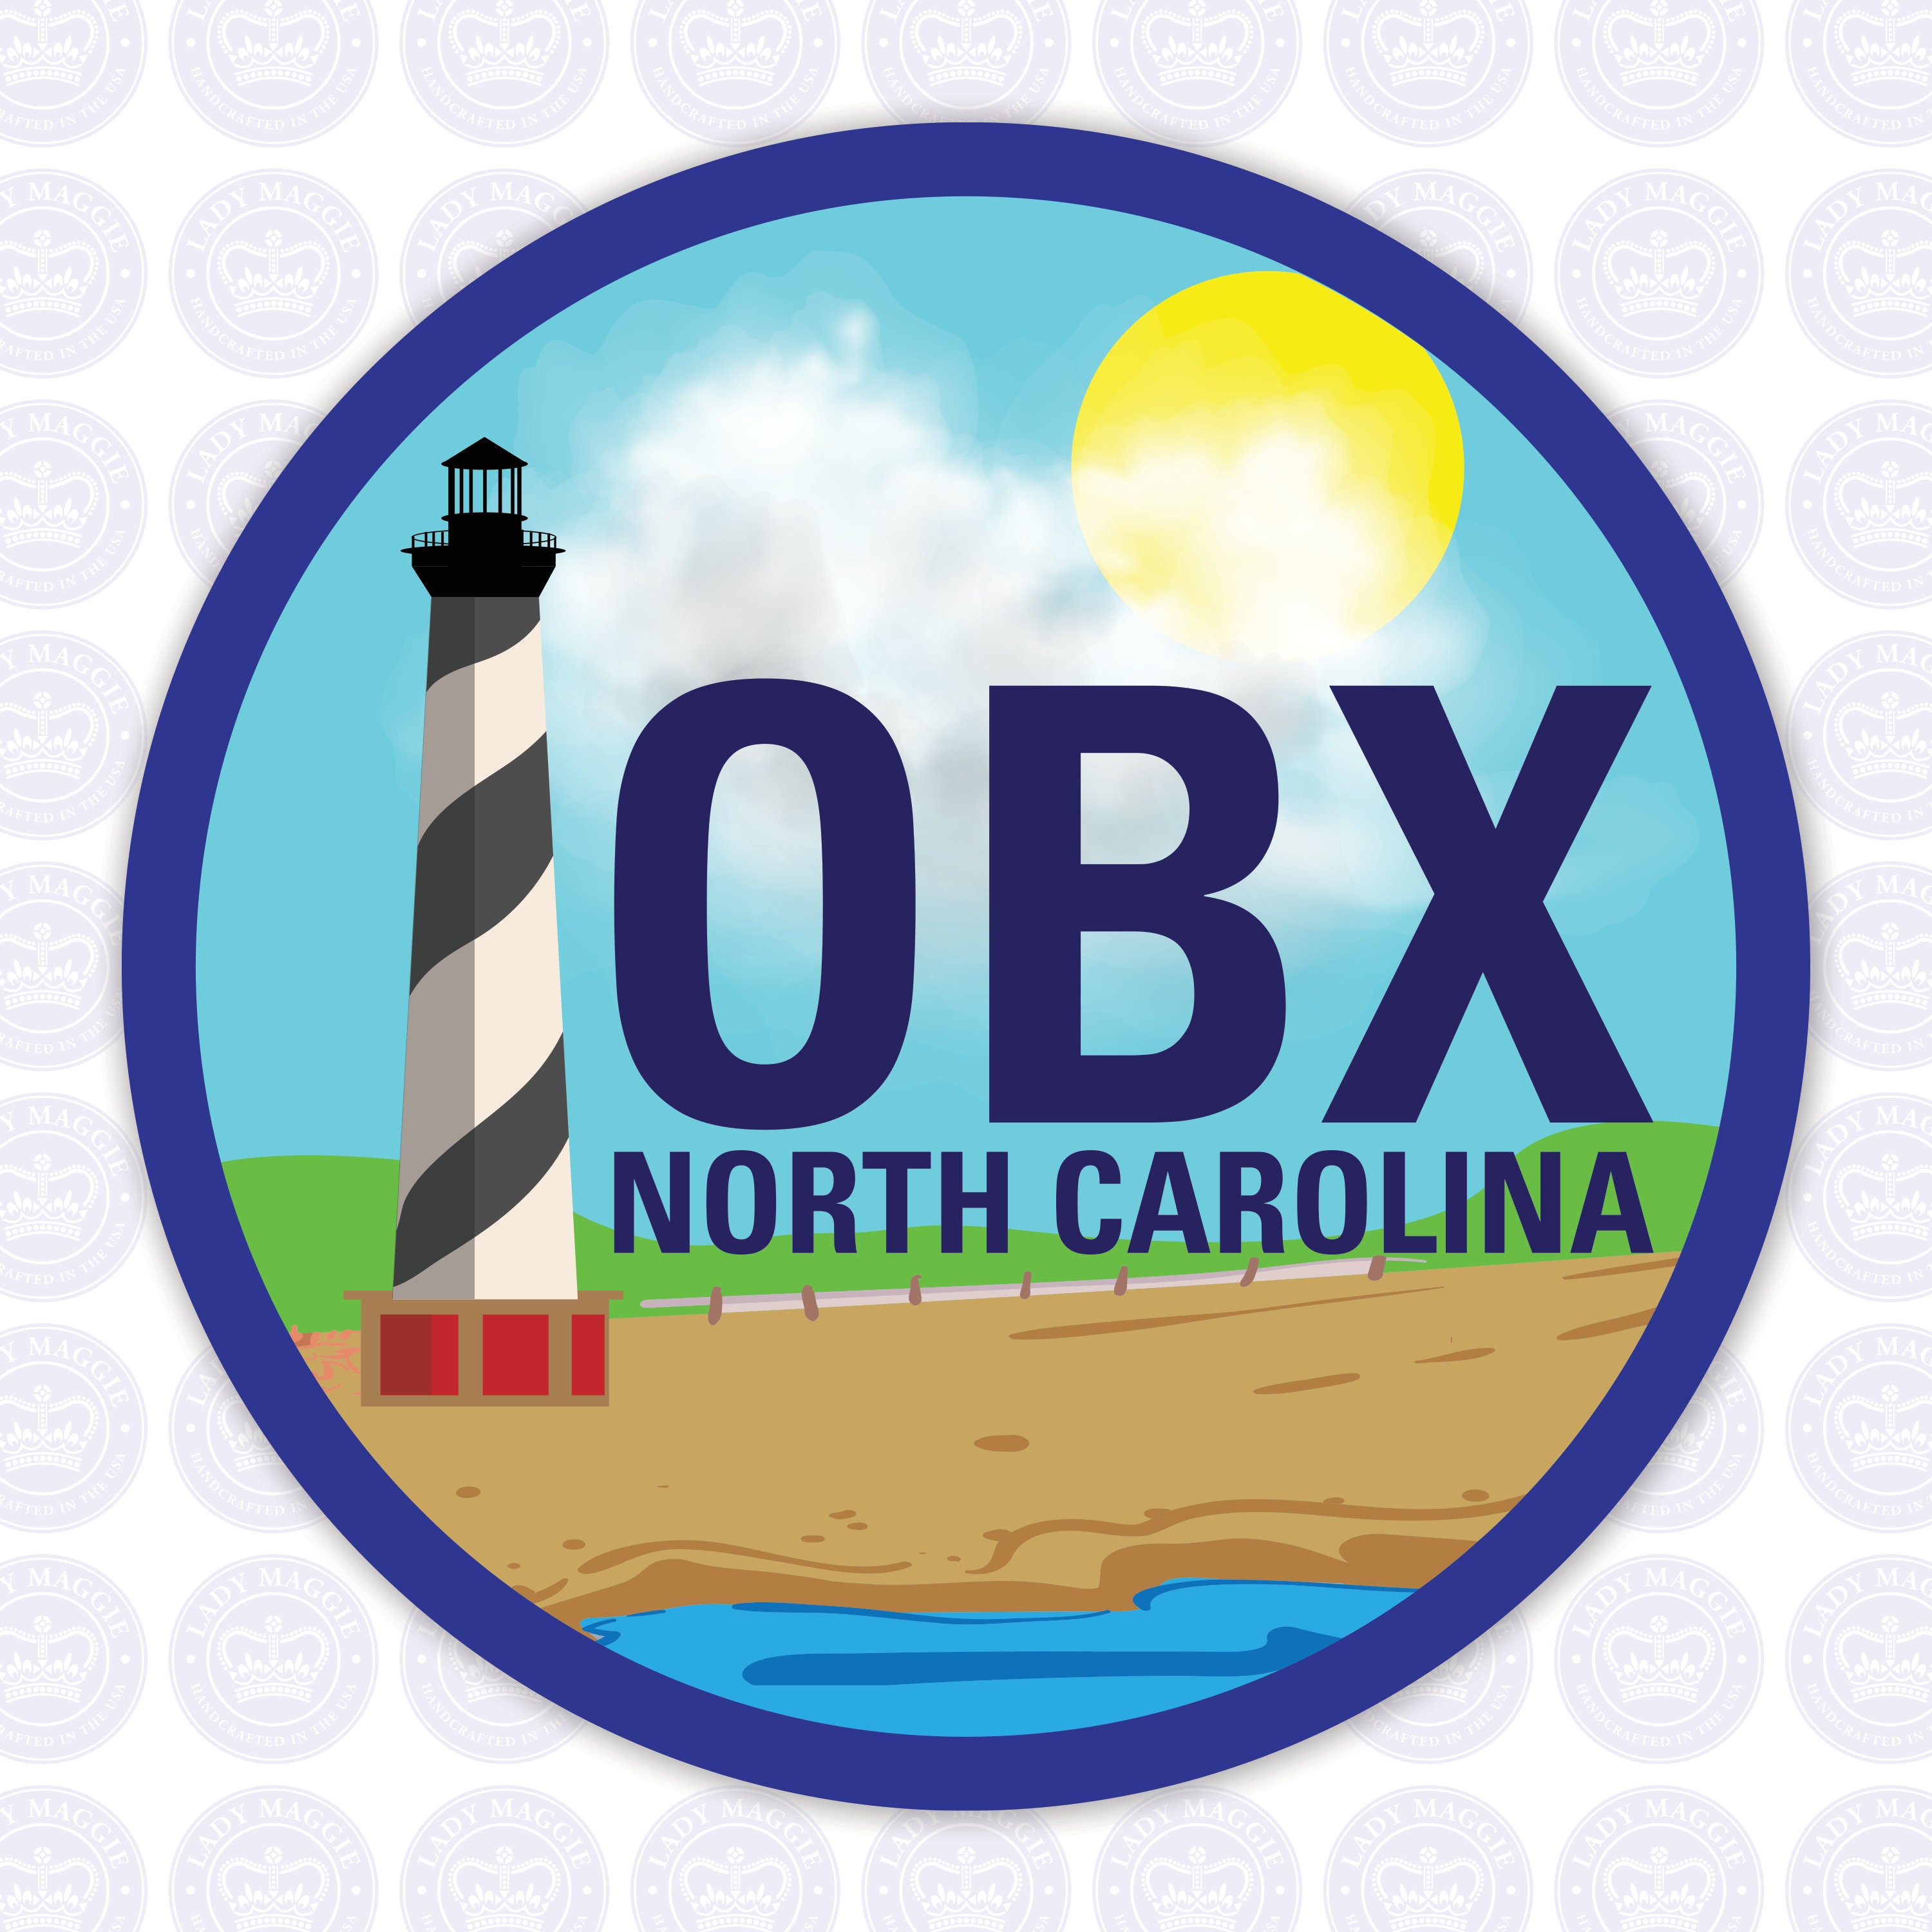 OBX Lighthouse Decal - Outer Banks Bumper Sticker - OBX Outer Banks Decal - North Carolina Outer Banks Yeti Decal - OBX Lighthouse Beach